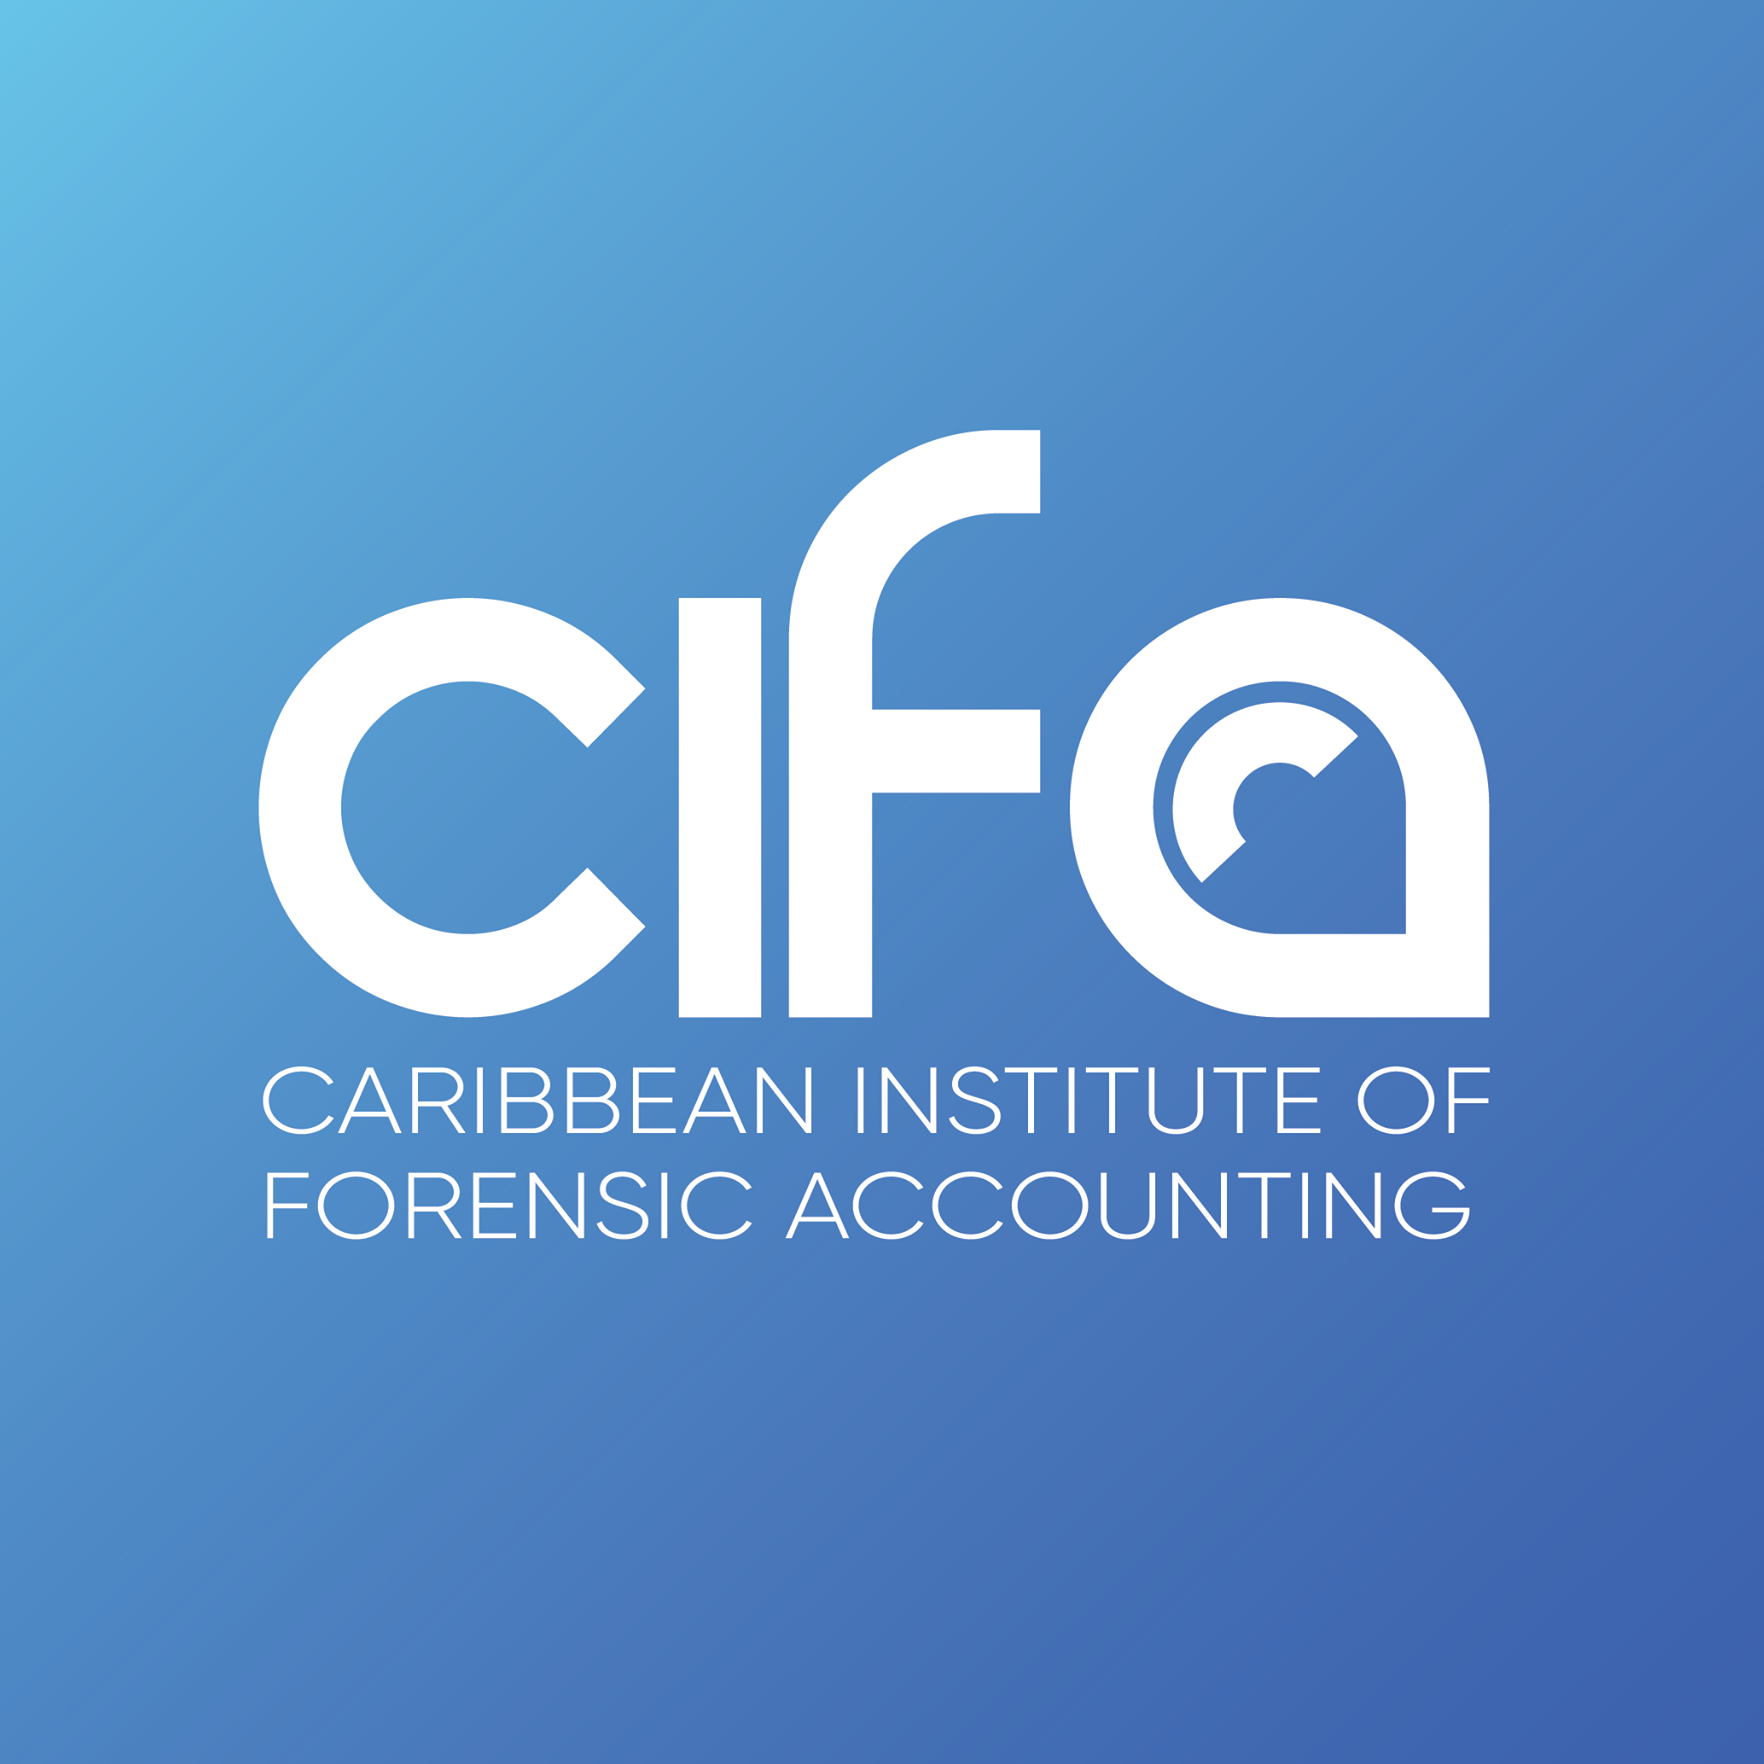 CIFA : The Caribbean Institute of Forensic Accounting.